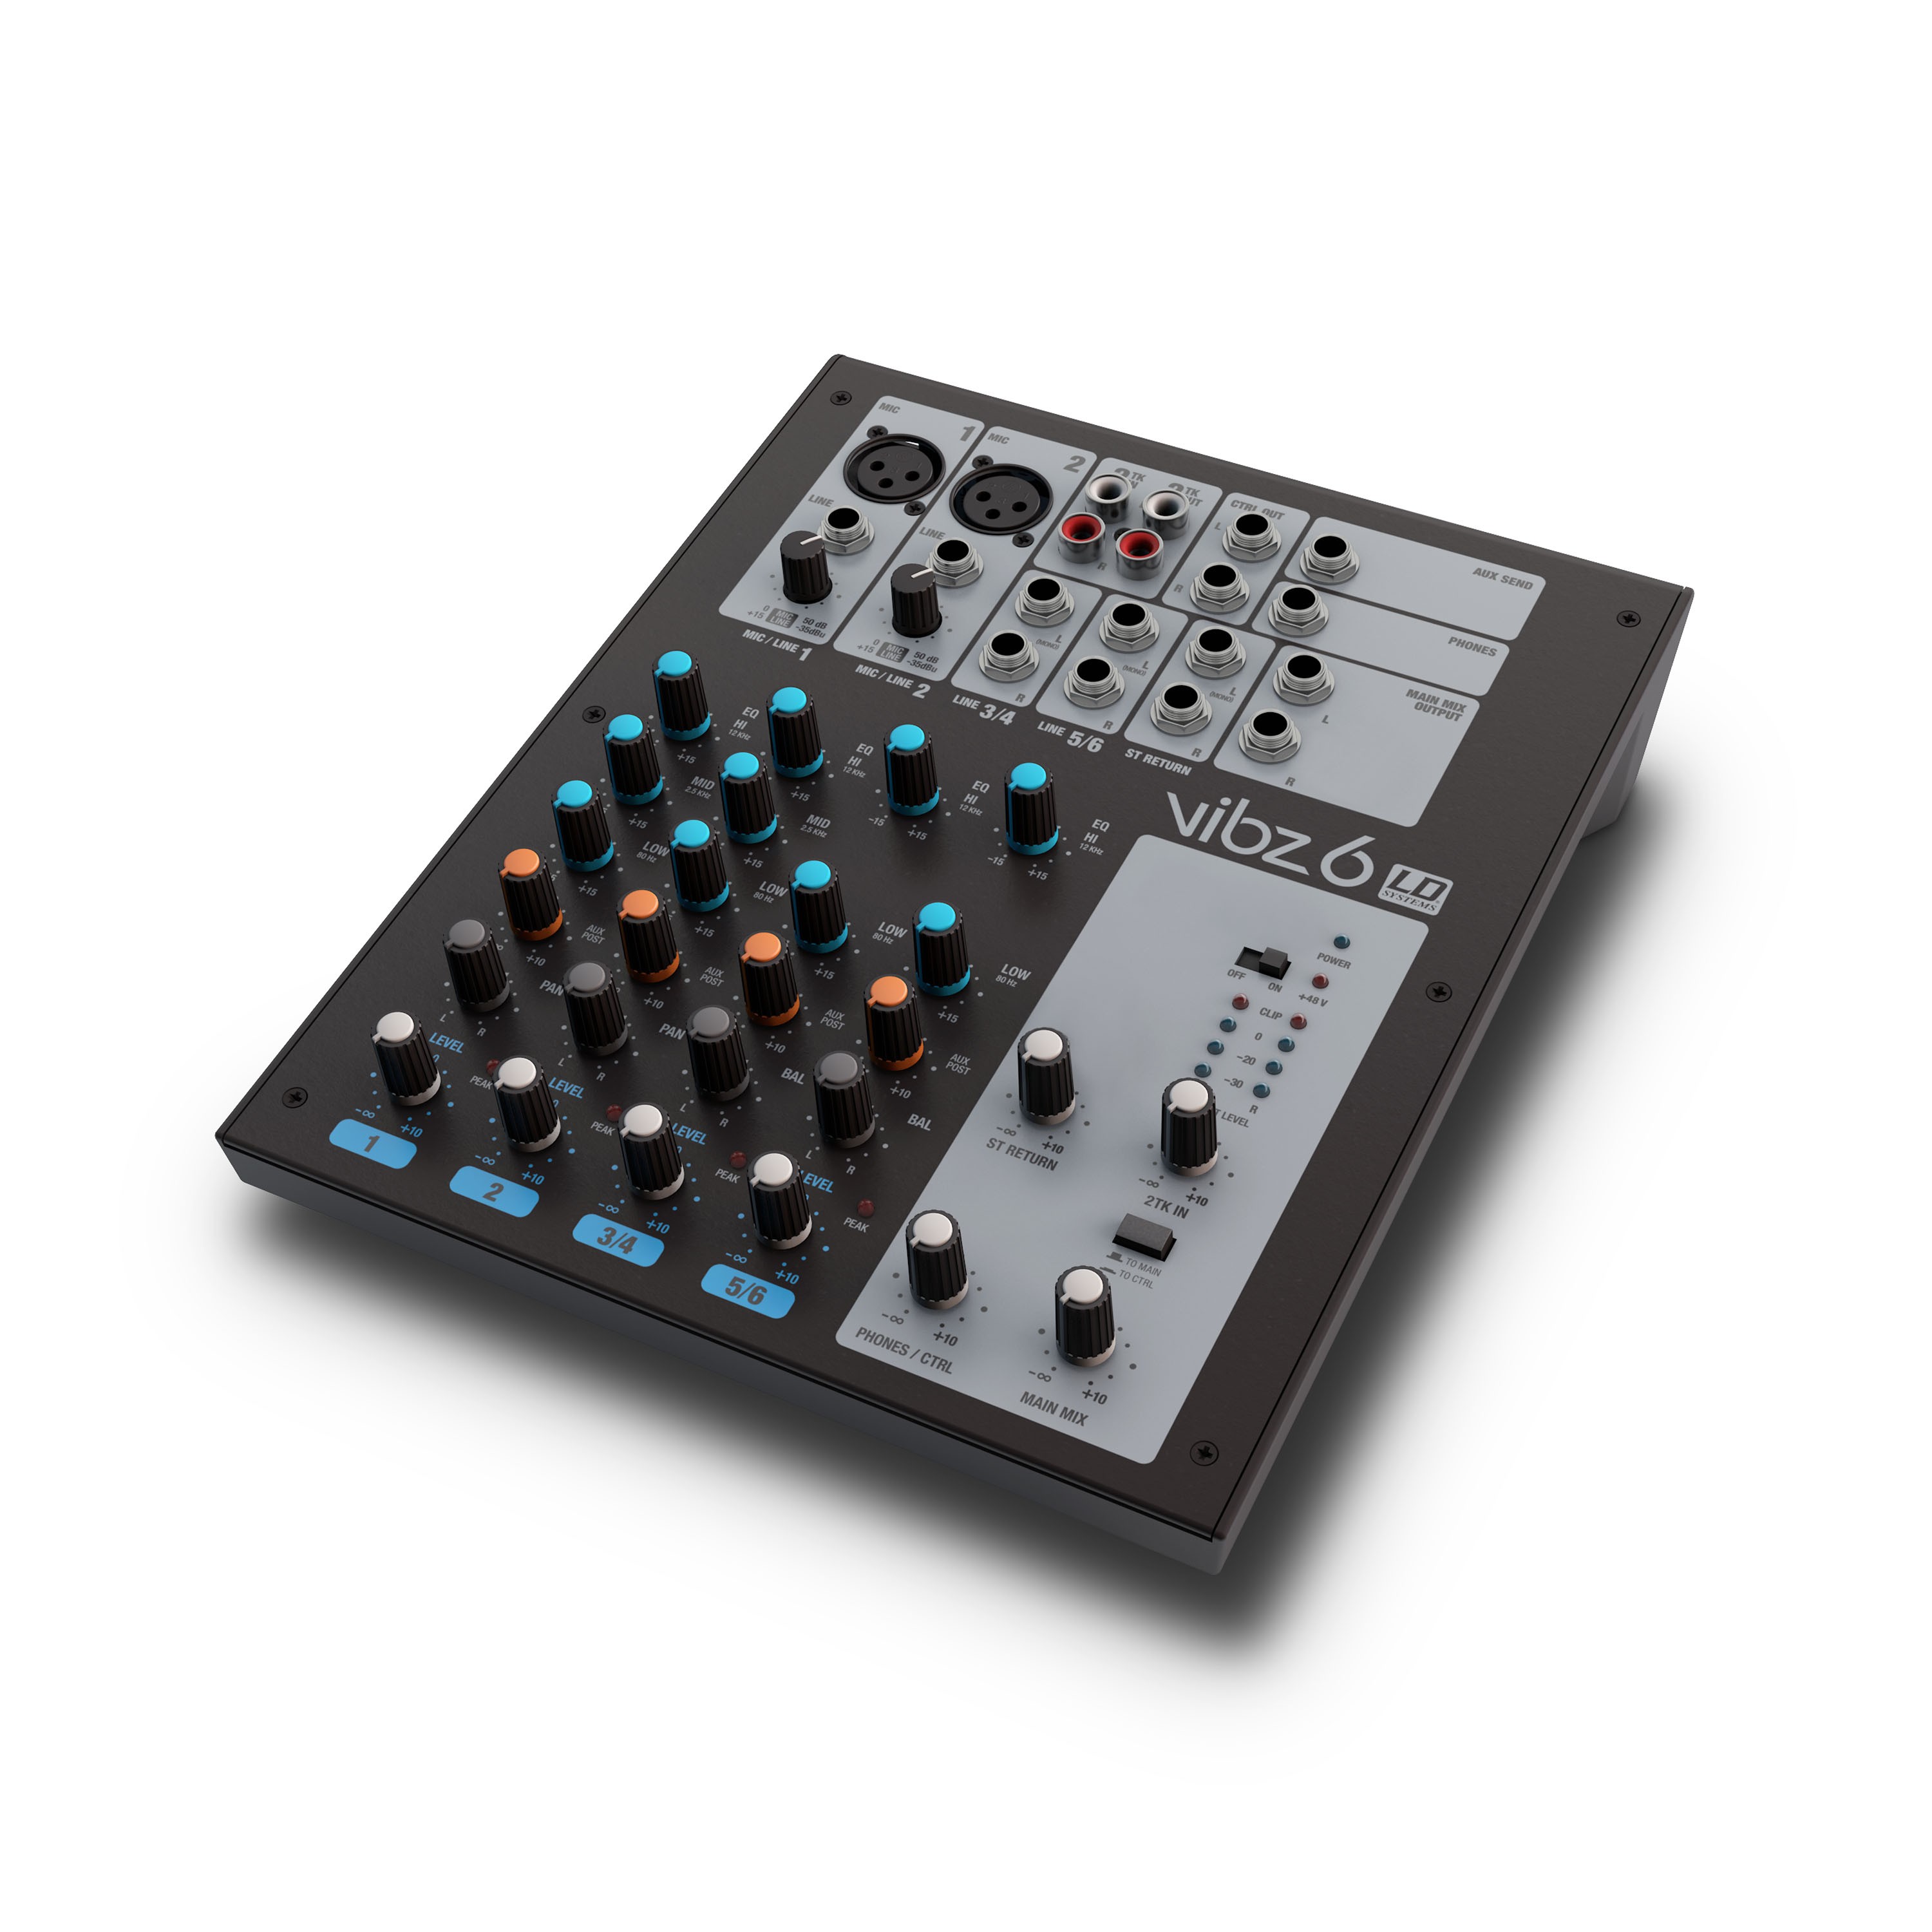 Ld Systems Vibz 6 - Analog mixing desk - Variation 1